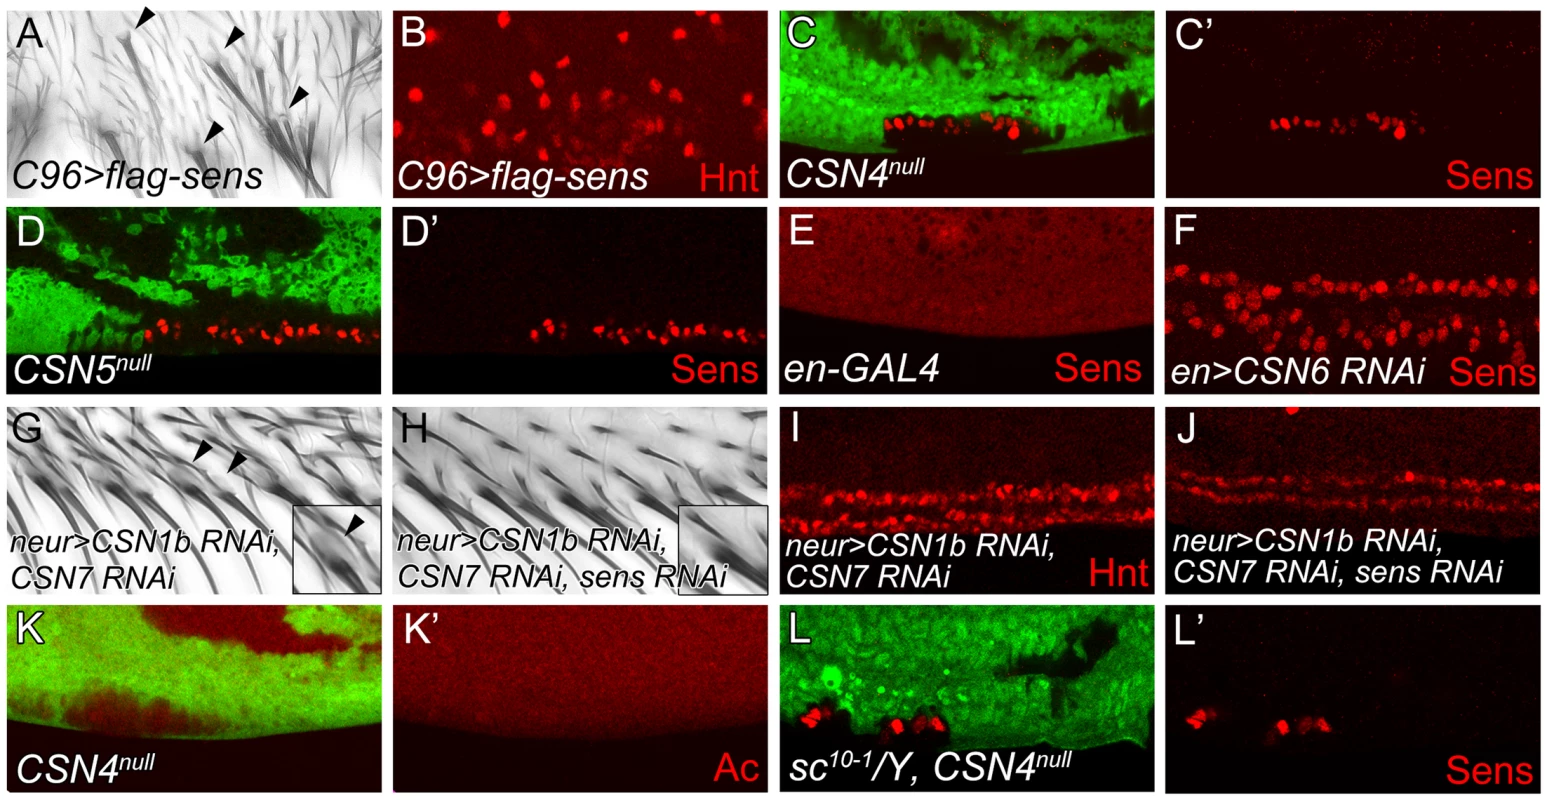 The CSN suppresses Sens to inhibit neural differentiation of PWM bristles.